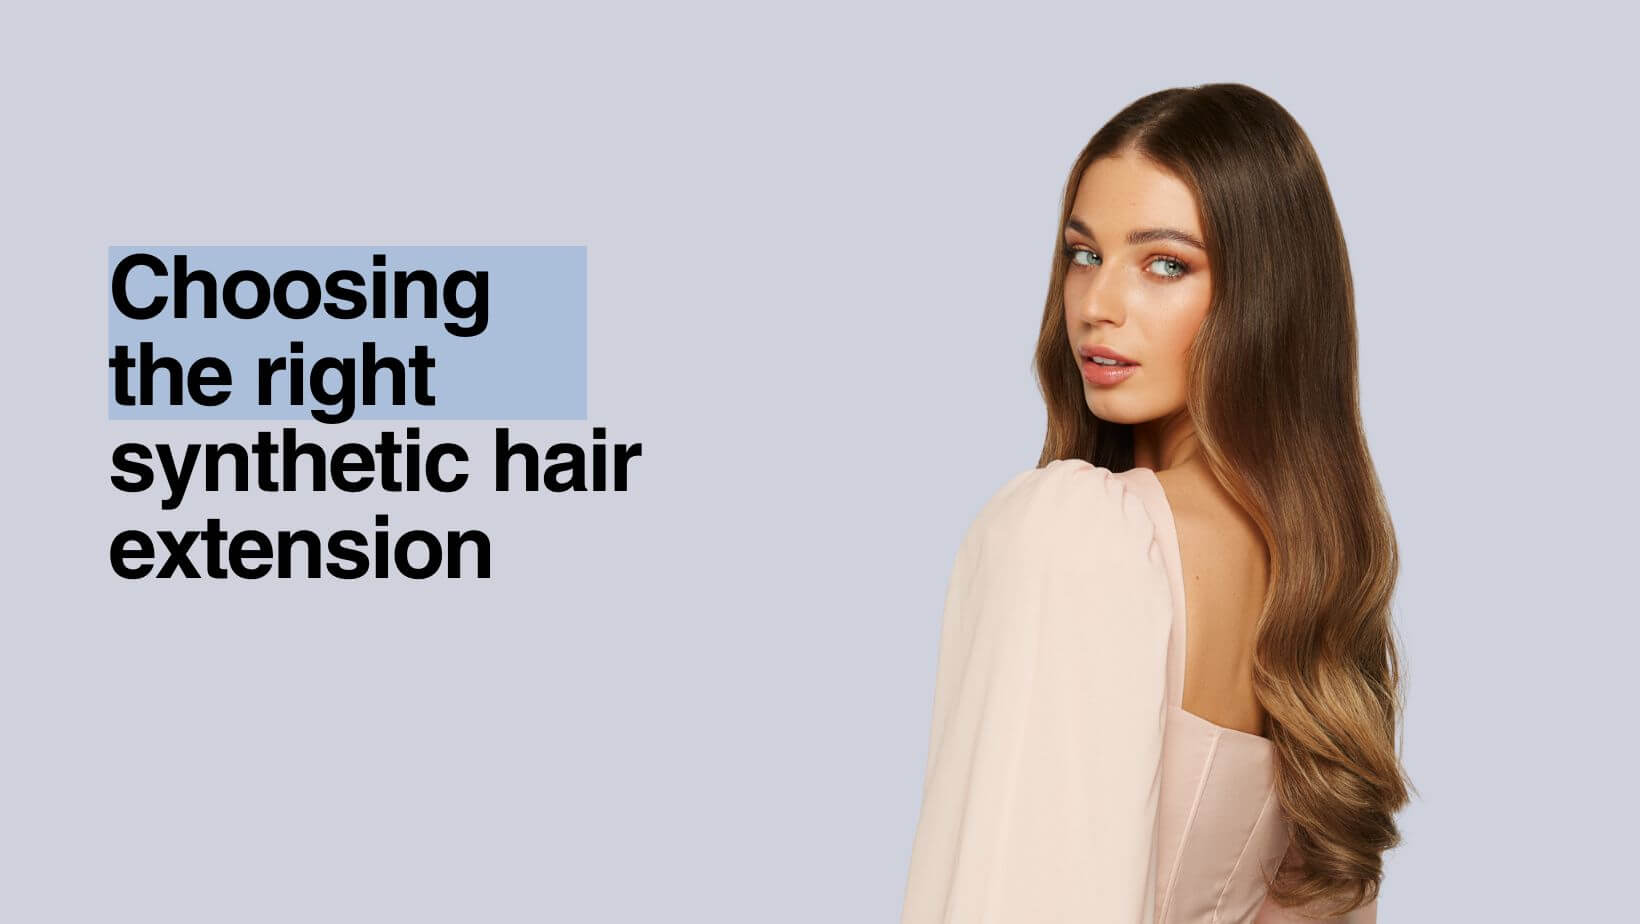 Choosing the right synthetic hair extension